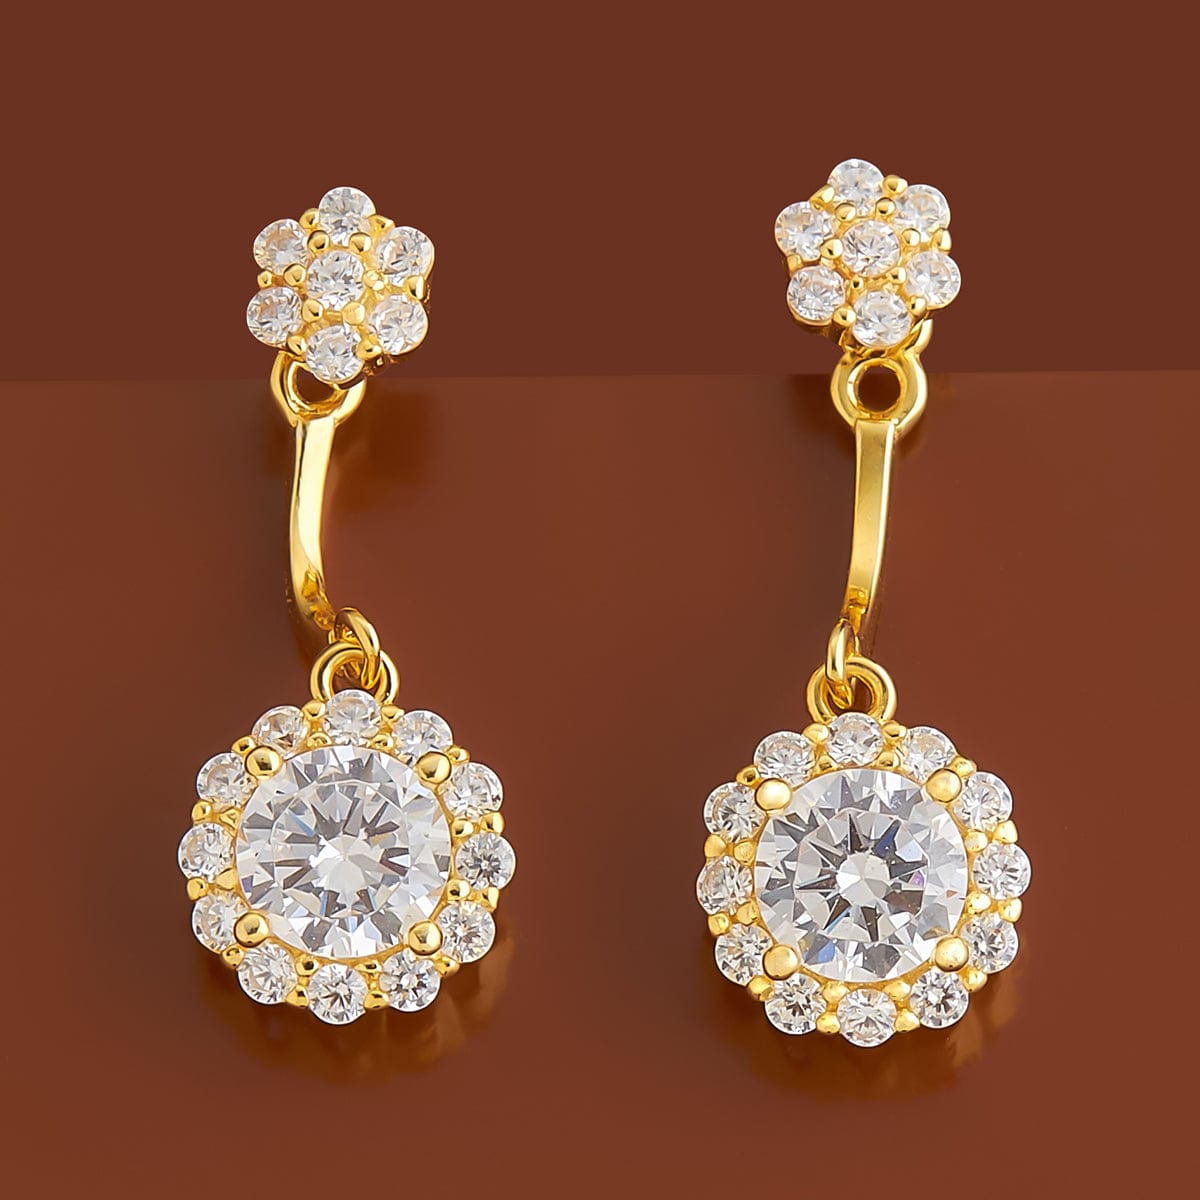 Amazing White Stones and Pearls Earrings - South India Jewels